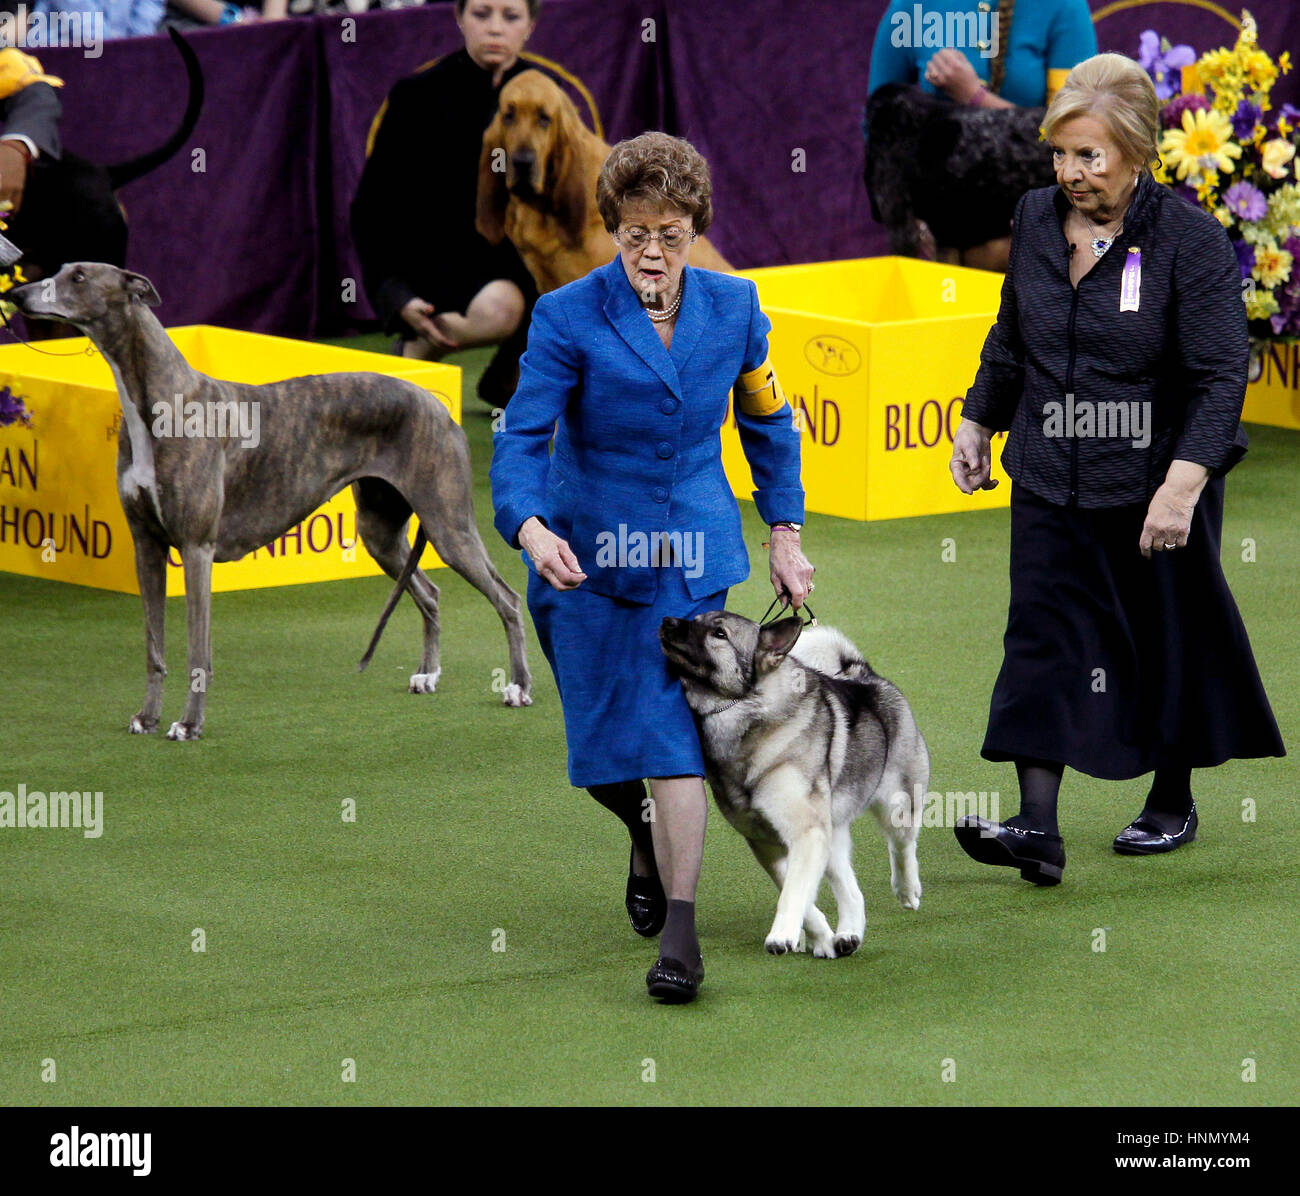 New York, United States. 13th Feb, 2017. 'Duffie', a Norwegian Elkhound during competition in the Hound Division at the 141st Annual Westminster Dog Show at Madison Square Garden in New York City on February 13th, 2017. Duffie won the division. Credit: Adam Stoltman/Alamy Live News Stock Photo